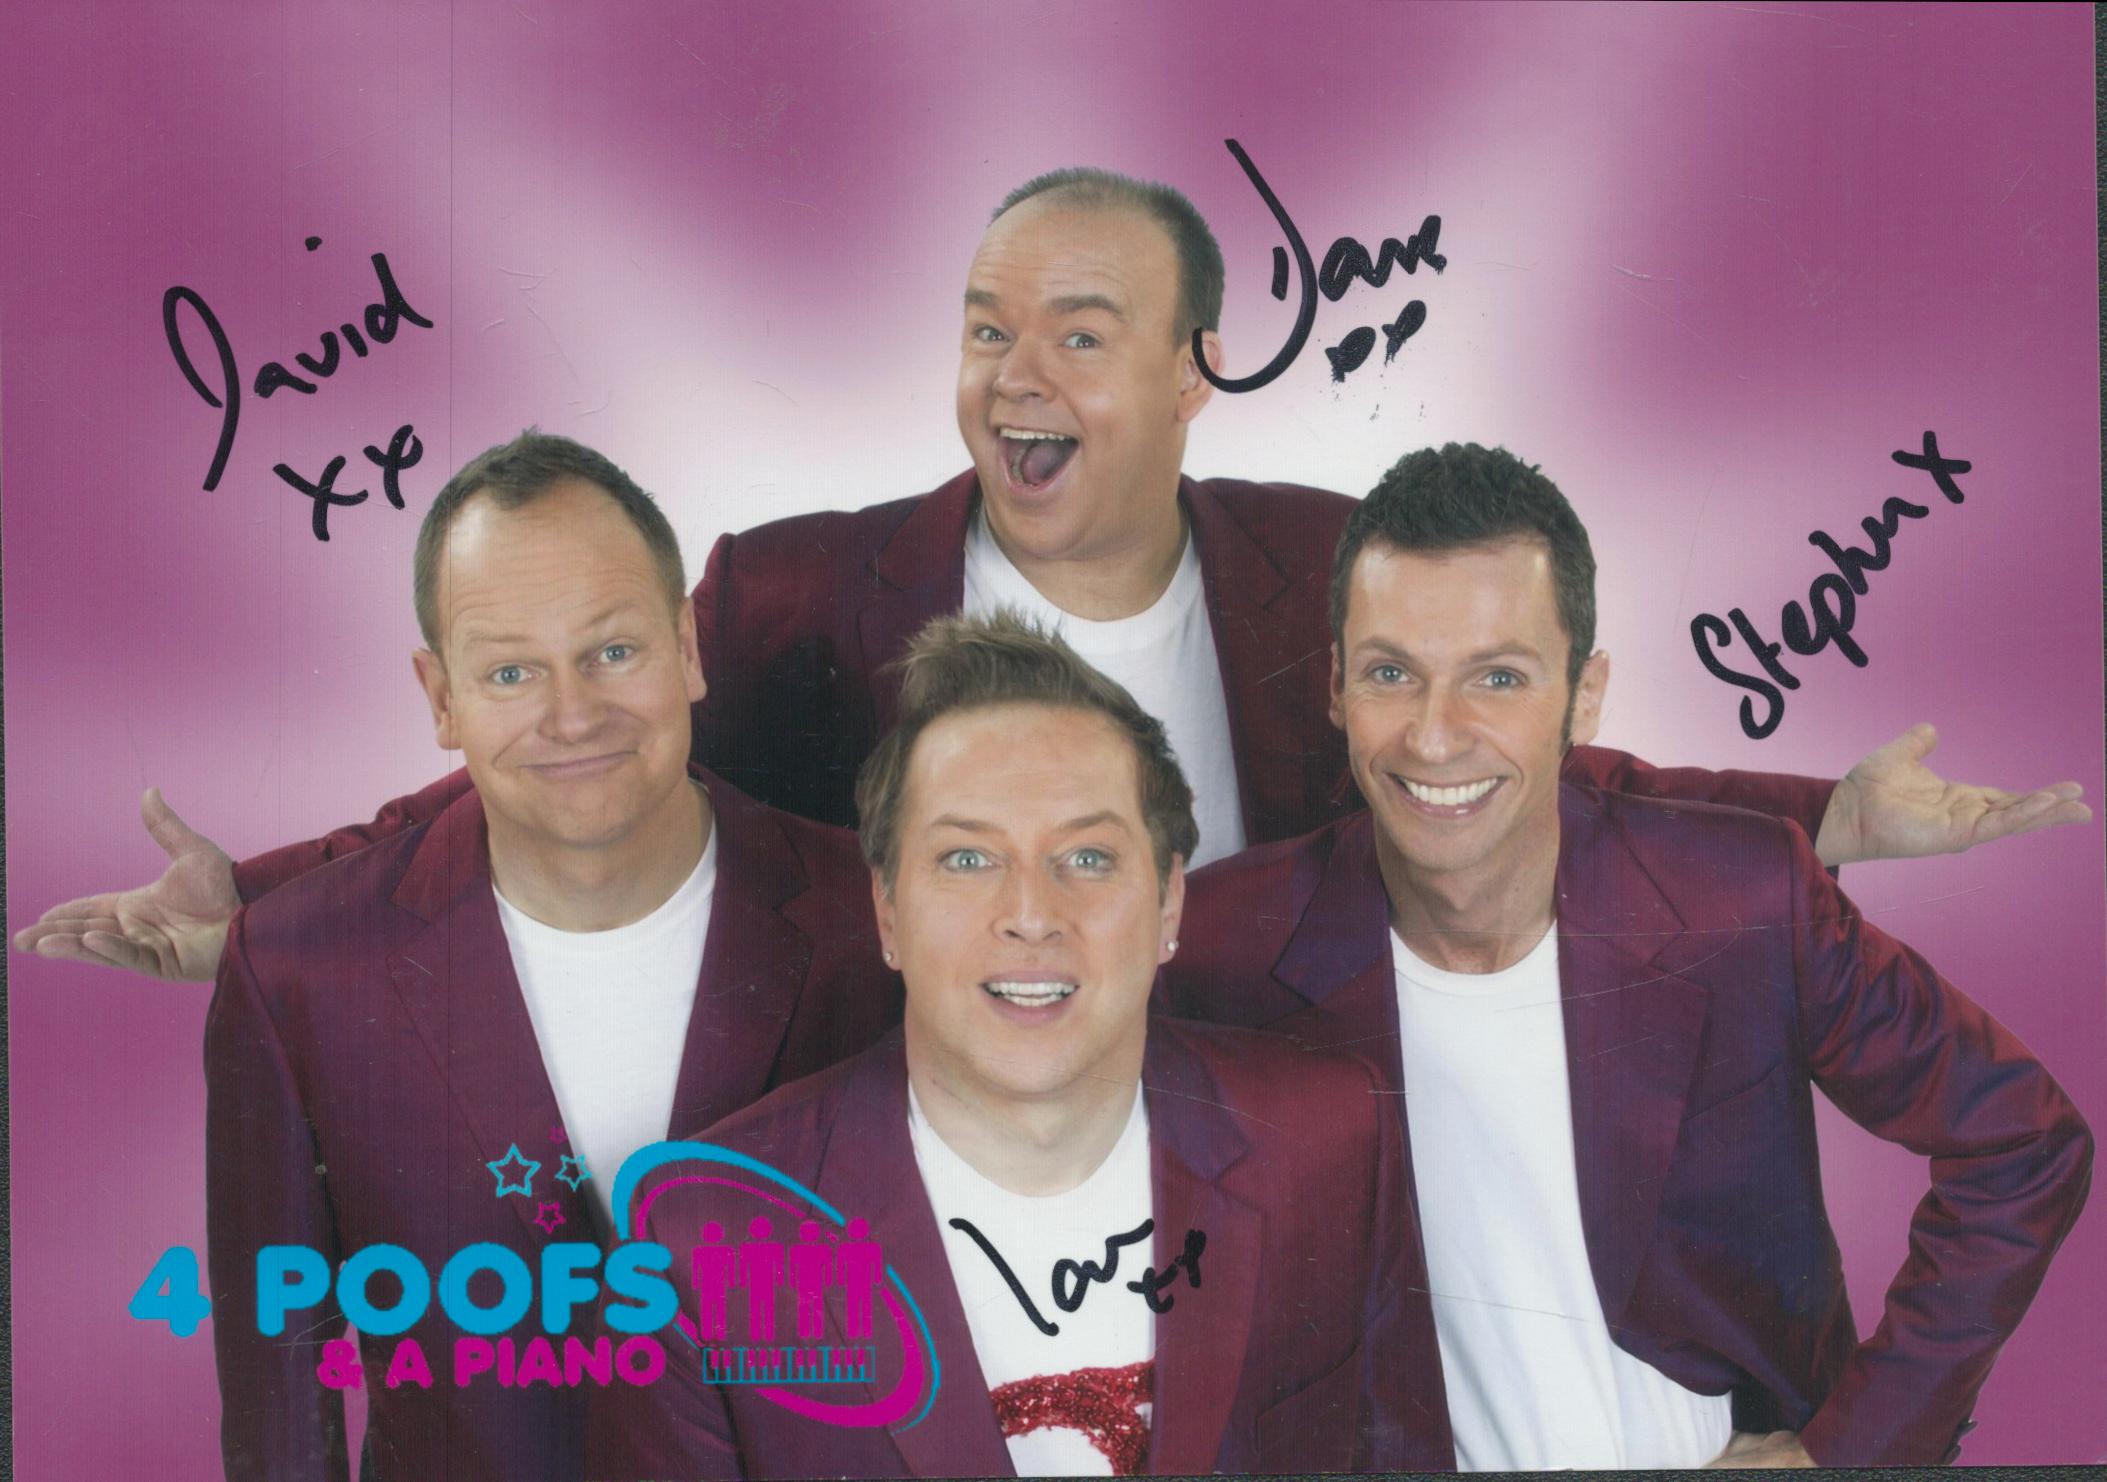 4 Poofs and a Piano multi signed David, Dave, Stephen 7x5 colour photo. Good condition. All